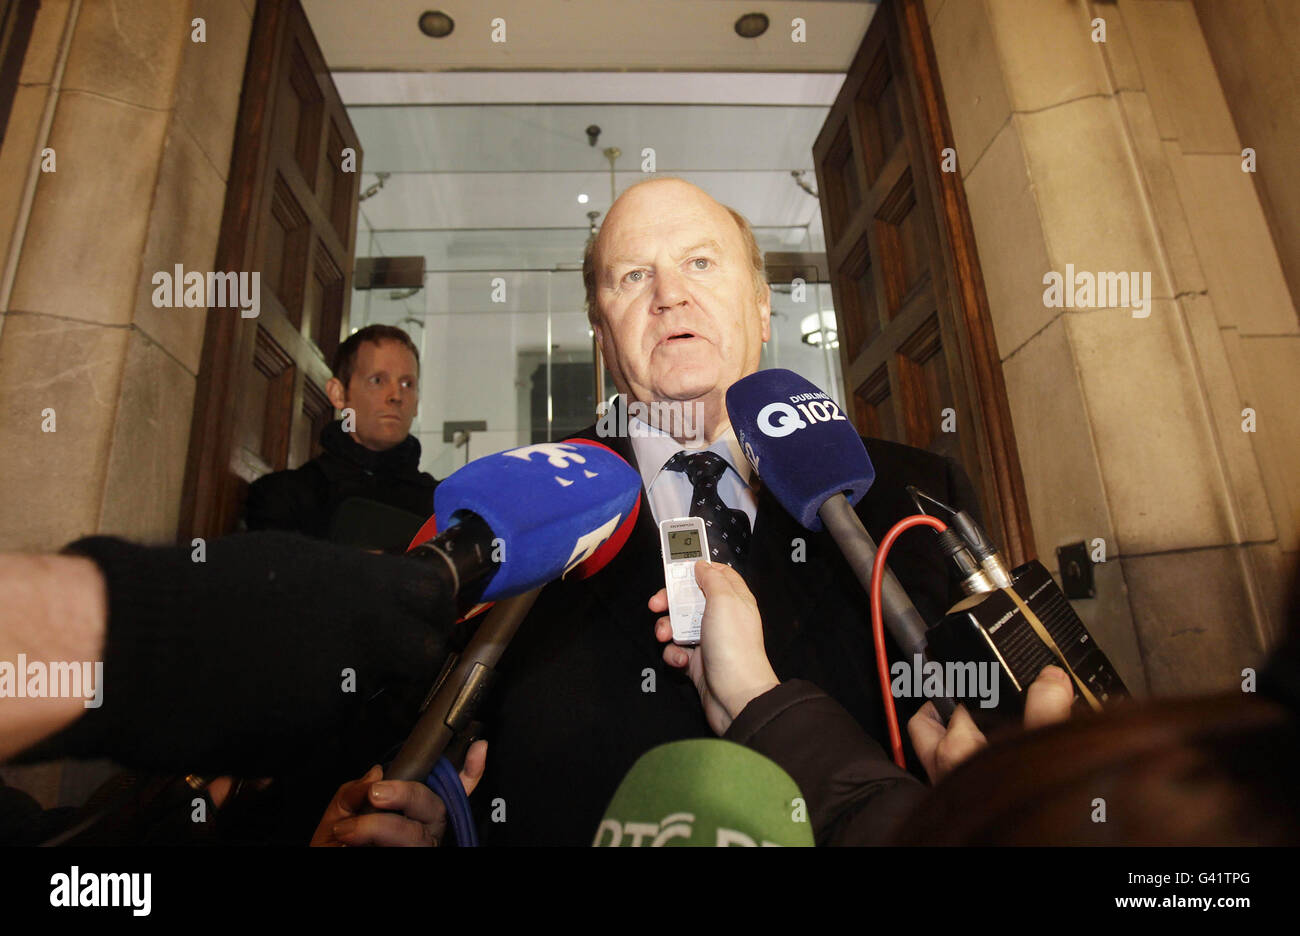 Fine Gael's Michael Noonan speaking to the media outside the Finance department on Merrion row in Dublin. Ireland's minority Government tonight secured support from the Opposition parties to pass the Finance Bill and dissolve parliament next week. Stock Photo